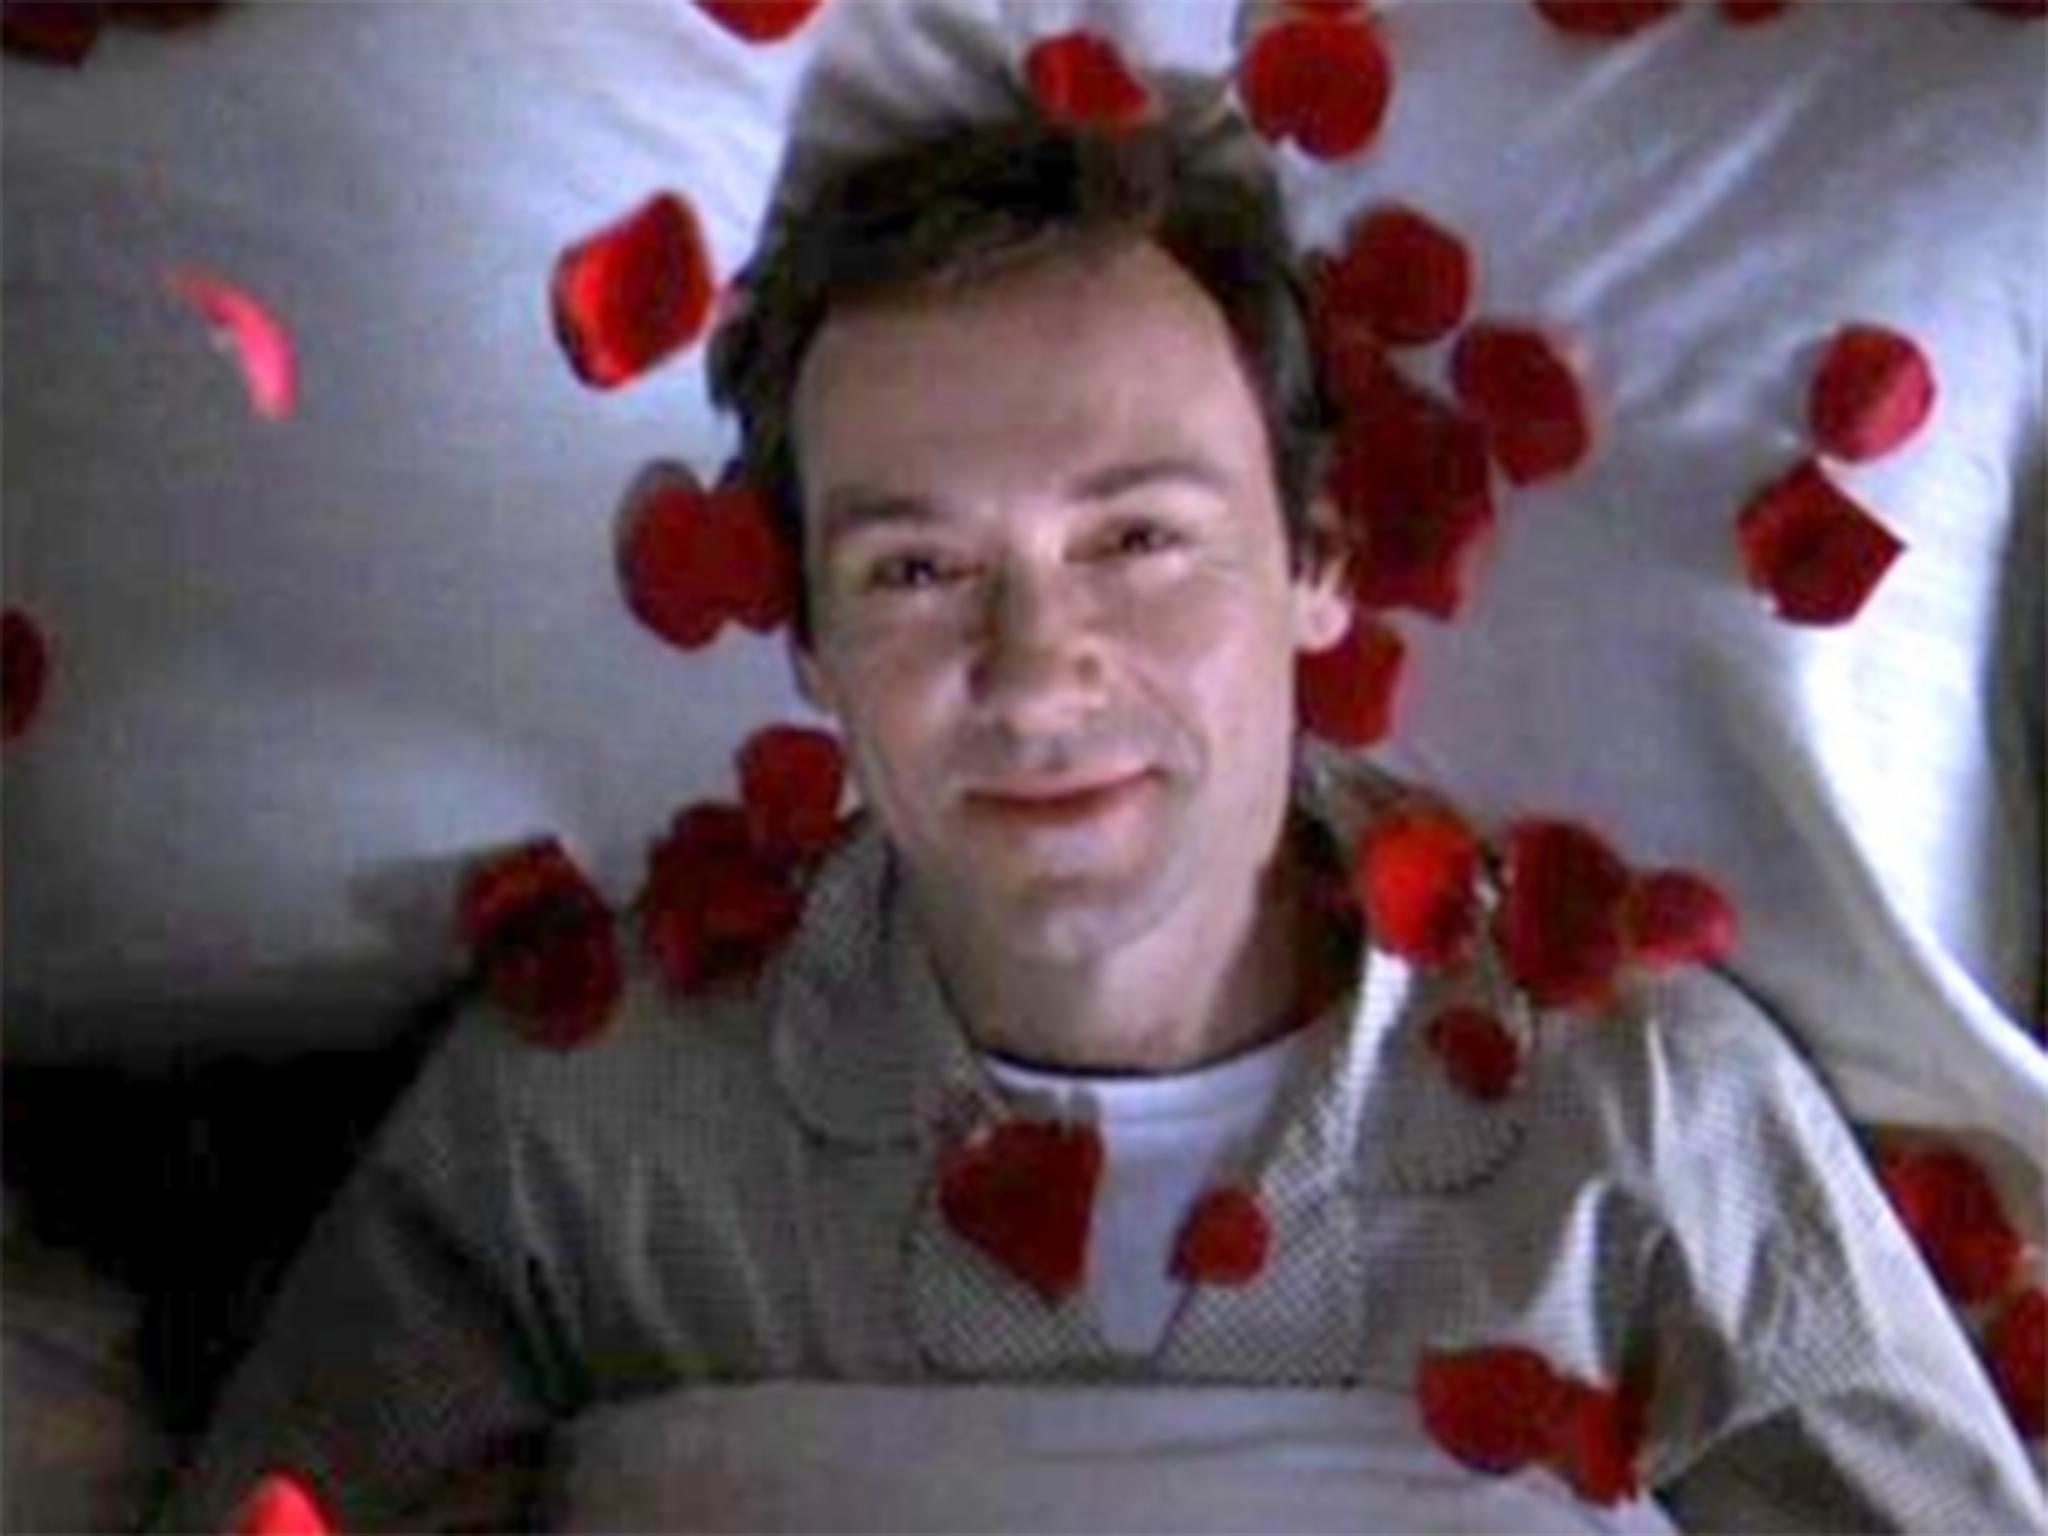 Spacey won an Oscar for Best Actor in 1999’s ‘American Beauty’ playing Lester Burnham having a midlife crisis